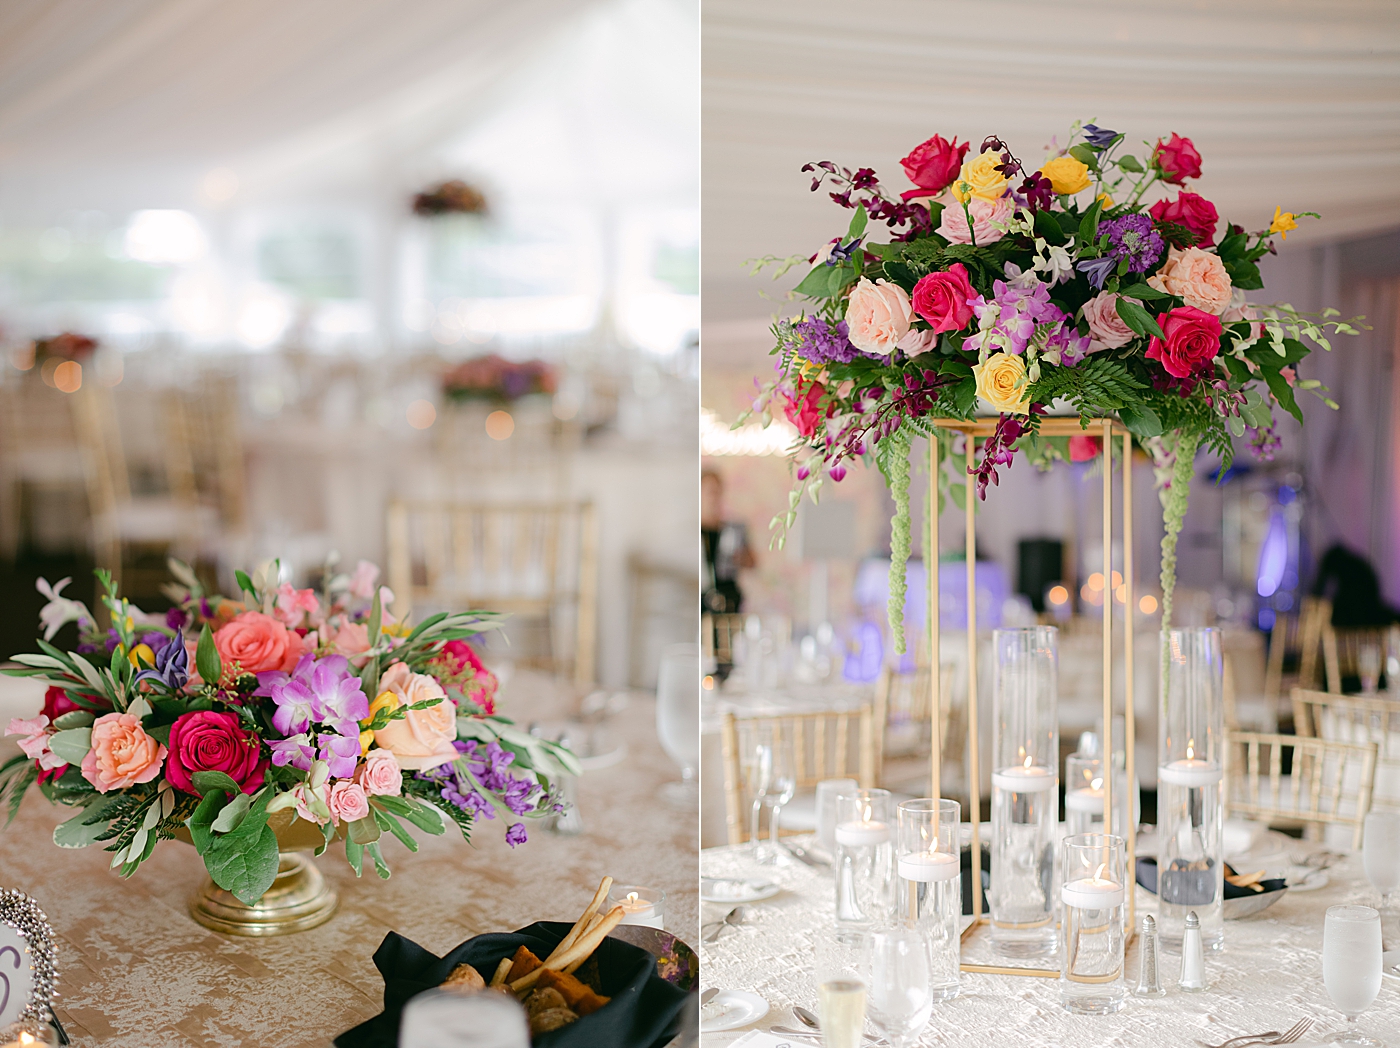 Reception table details | Image by Hope Helmuth Photography